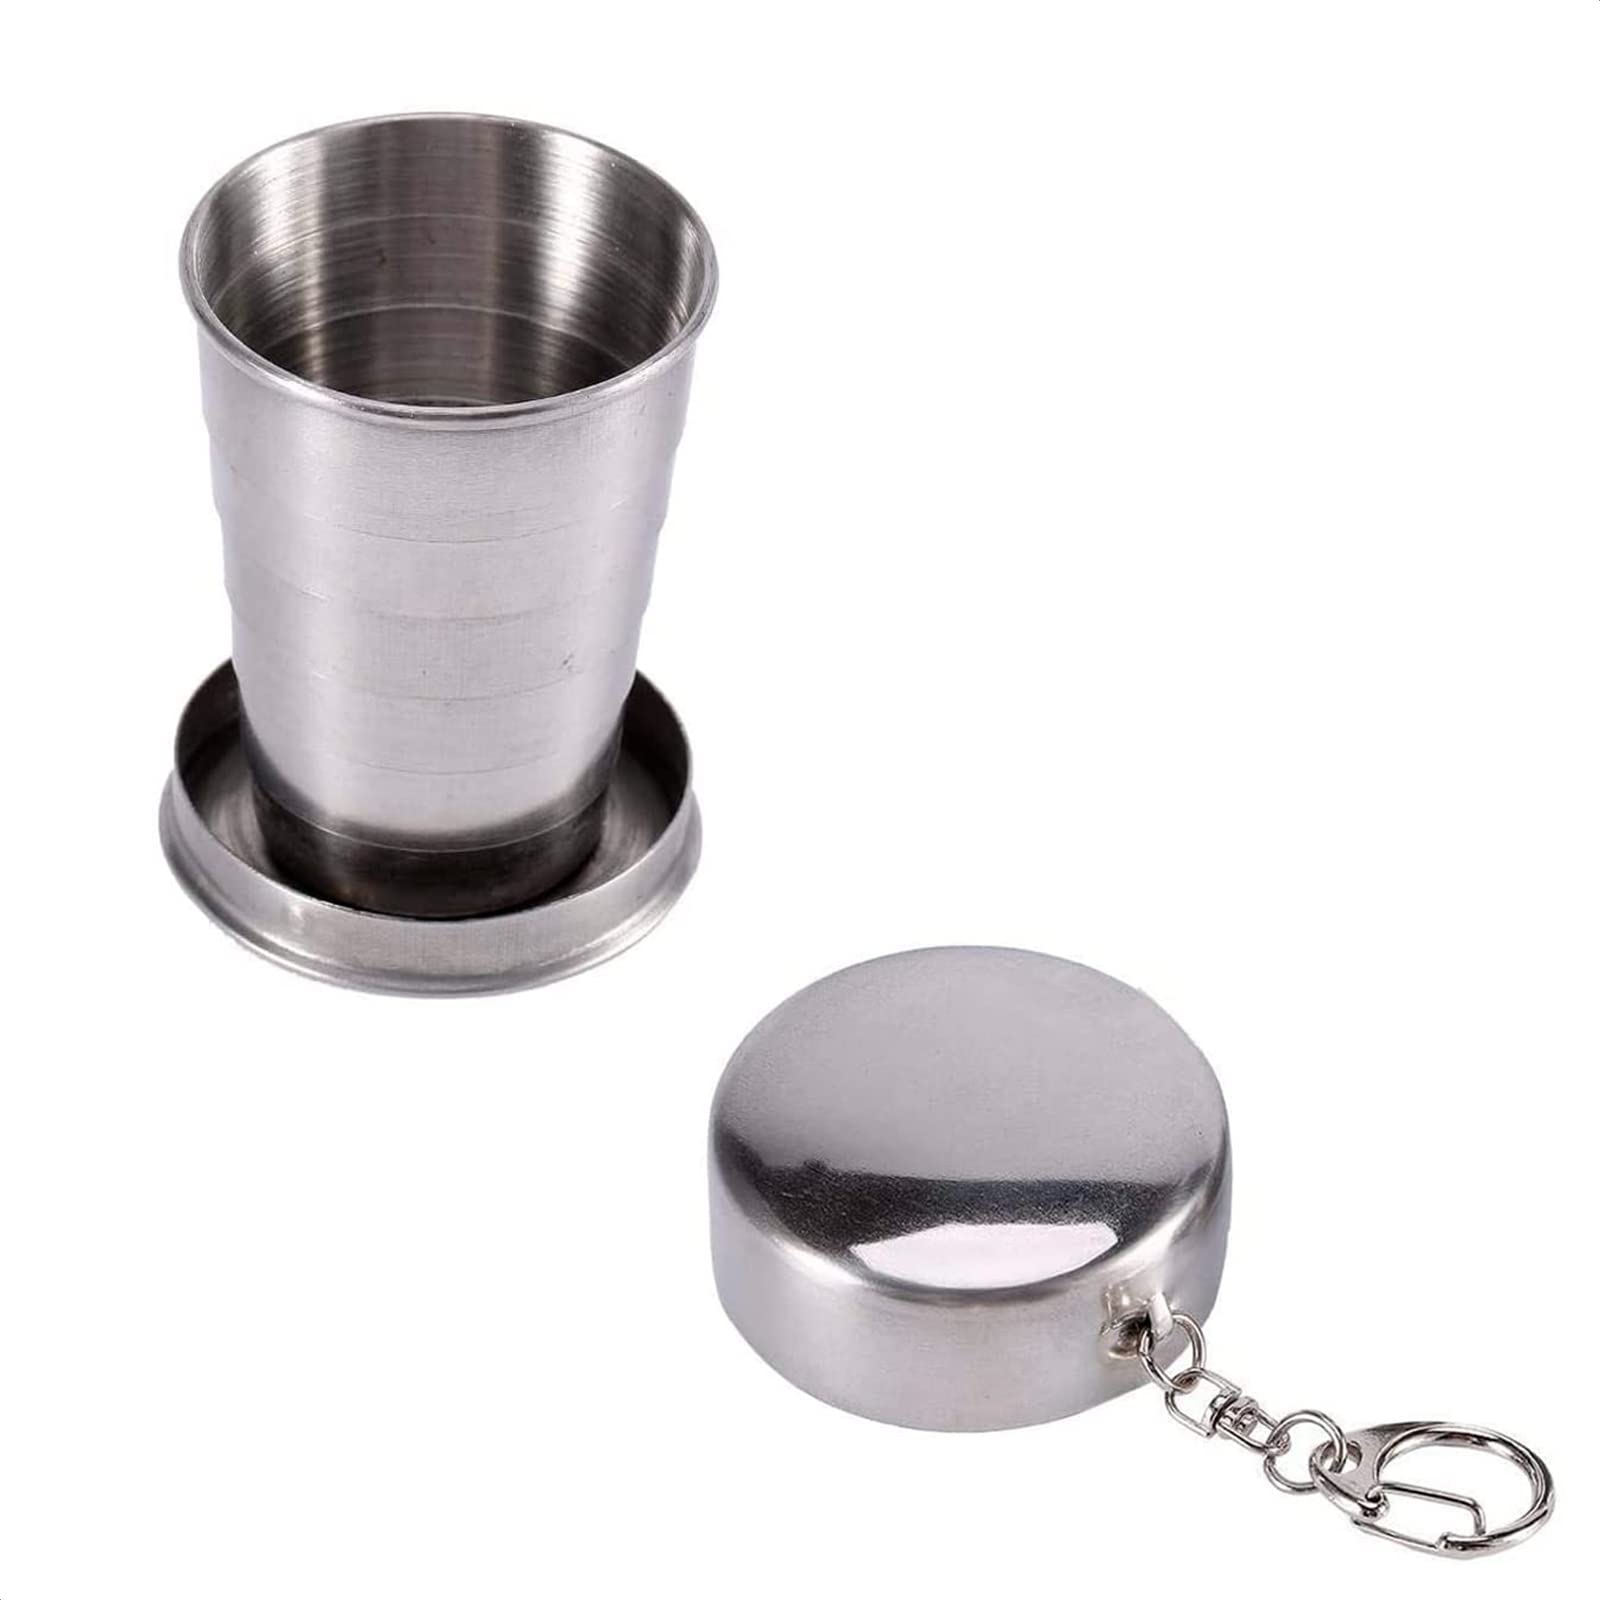 Collapsible Cup Outdoor Shot Glass Keychain Camping Folding Metal Cup   Collapsible Cups Drinking Telescopic Portable Shot Glass Premium Stackable  Metal Collapsable Cup Travel Telescoping Mug (75ml)